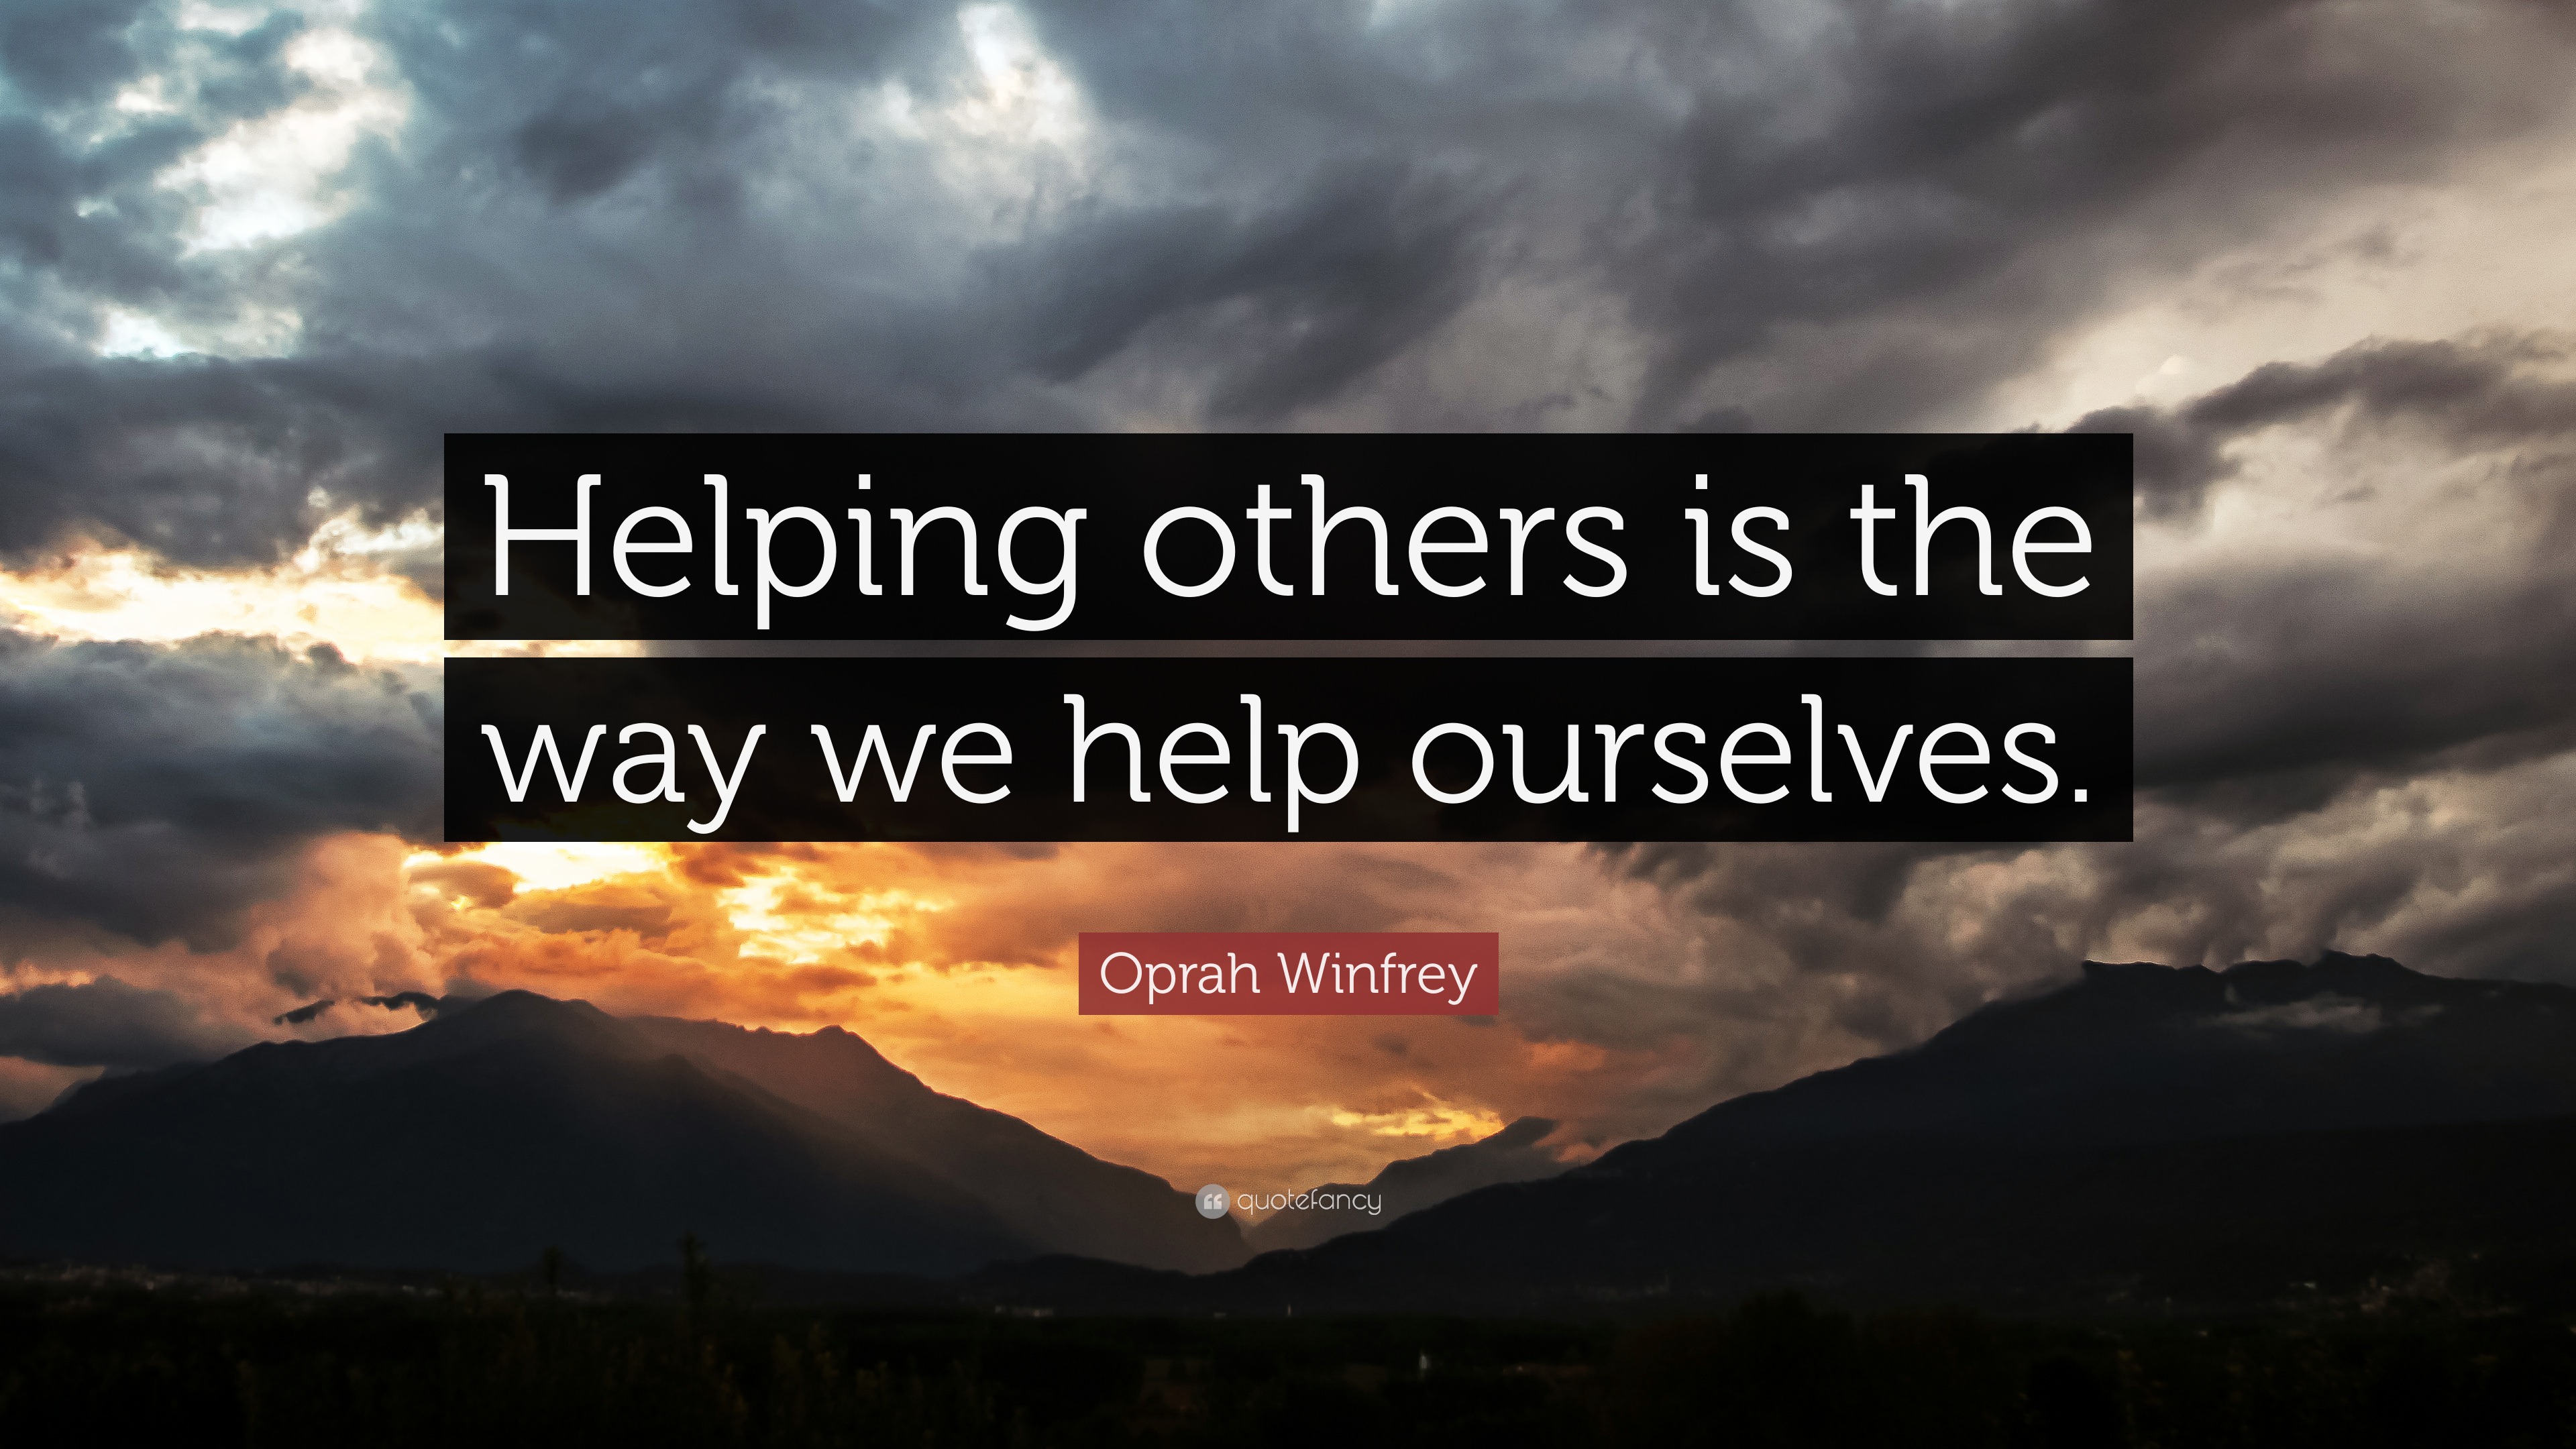 Oprah Winfrey Quote: “Helping others is the way we help ourselves.”